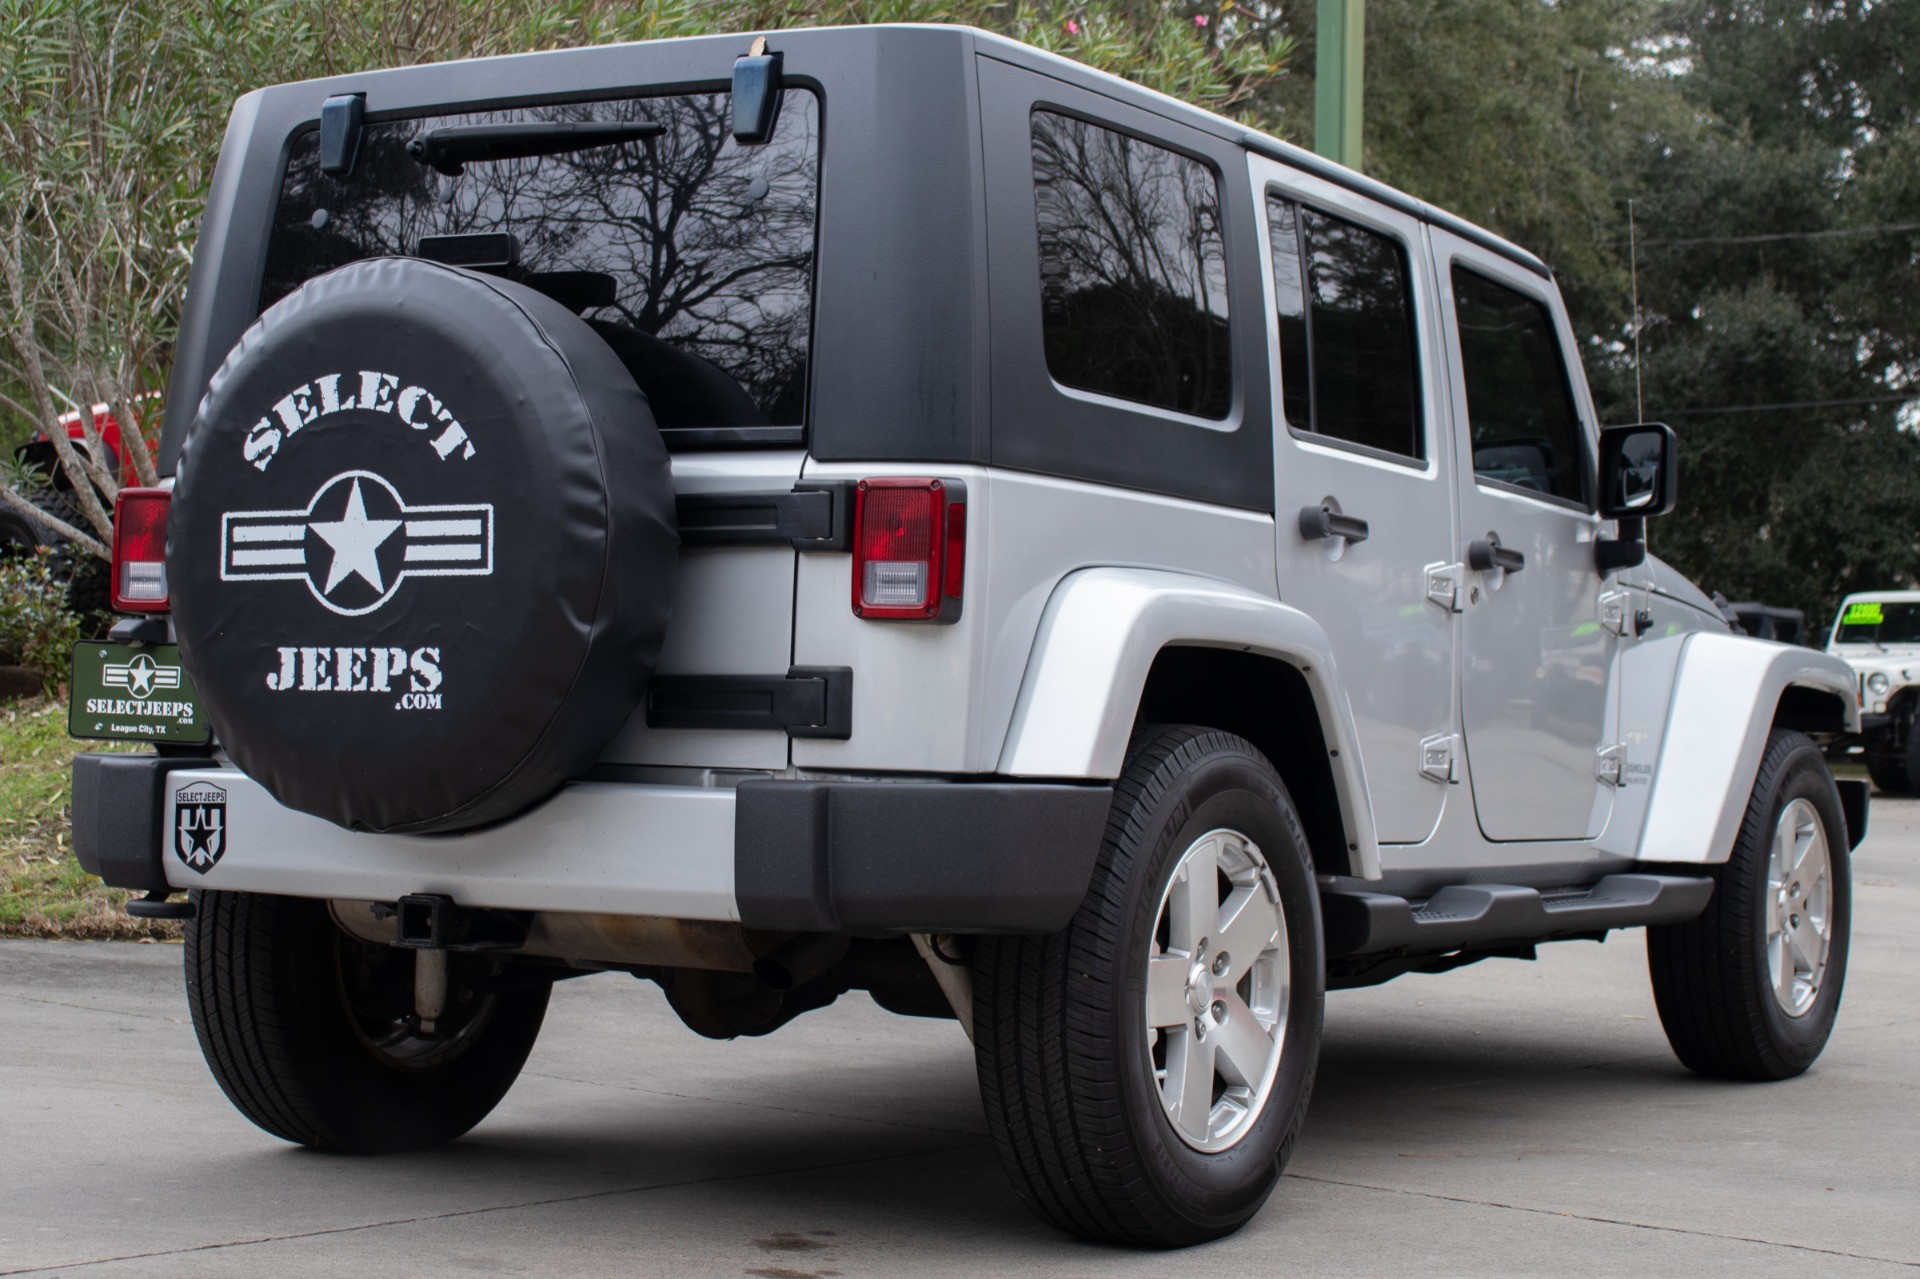 Used 2009 Jeep Wrangler Unlimited Sahara For Sale ($23,995) | Select Jeeps  Inc. Stock #701745